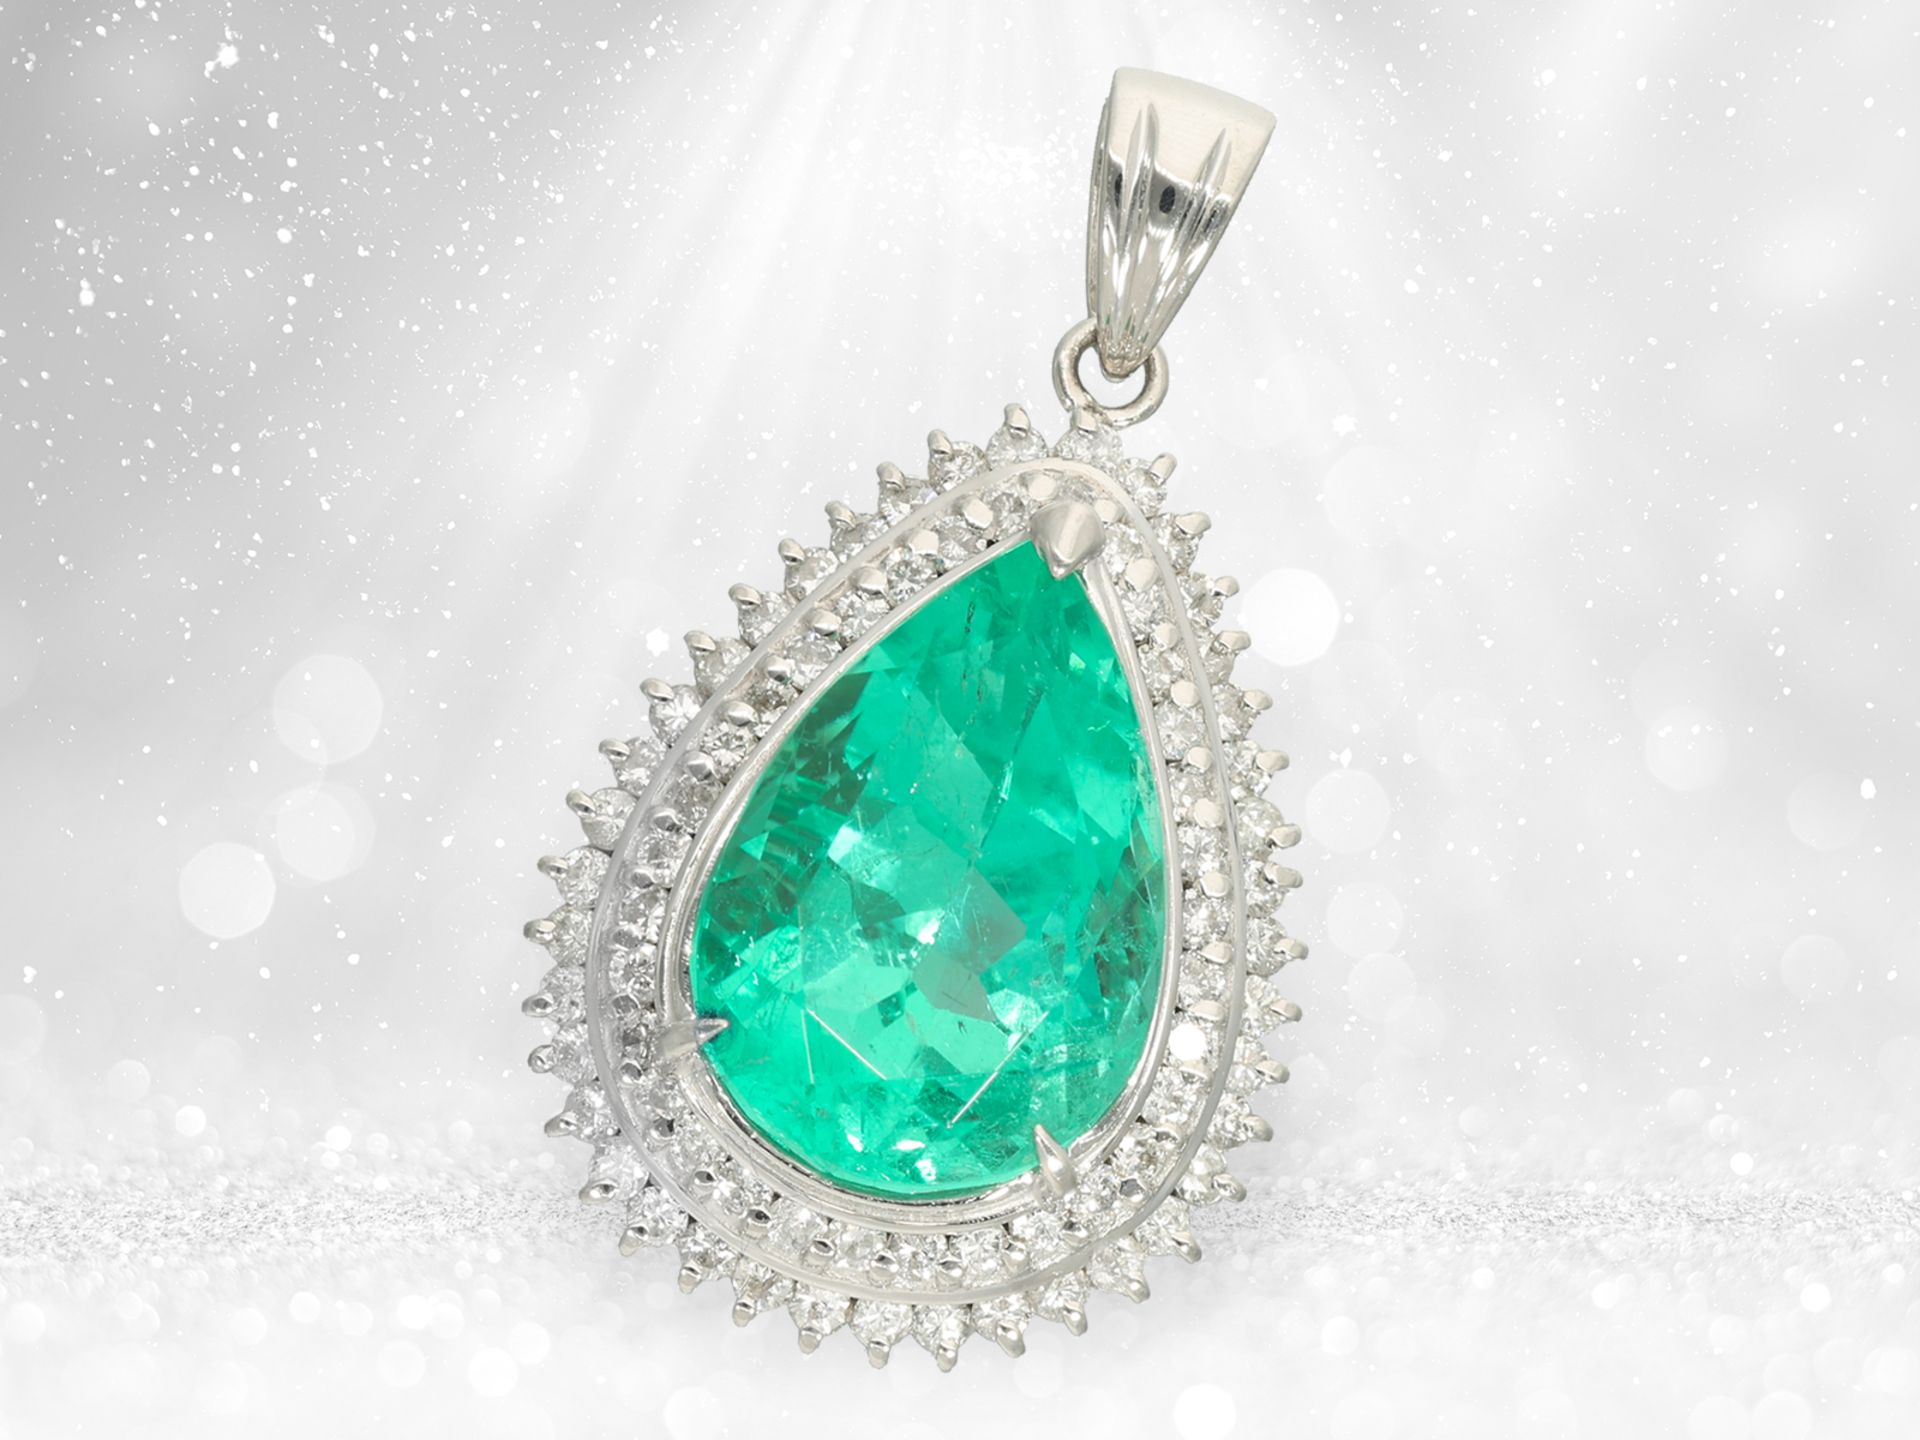 Pendant: very high quality platinum pendant with certified Colombian emerald of approx. 5ct